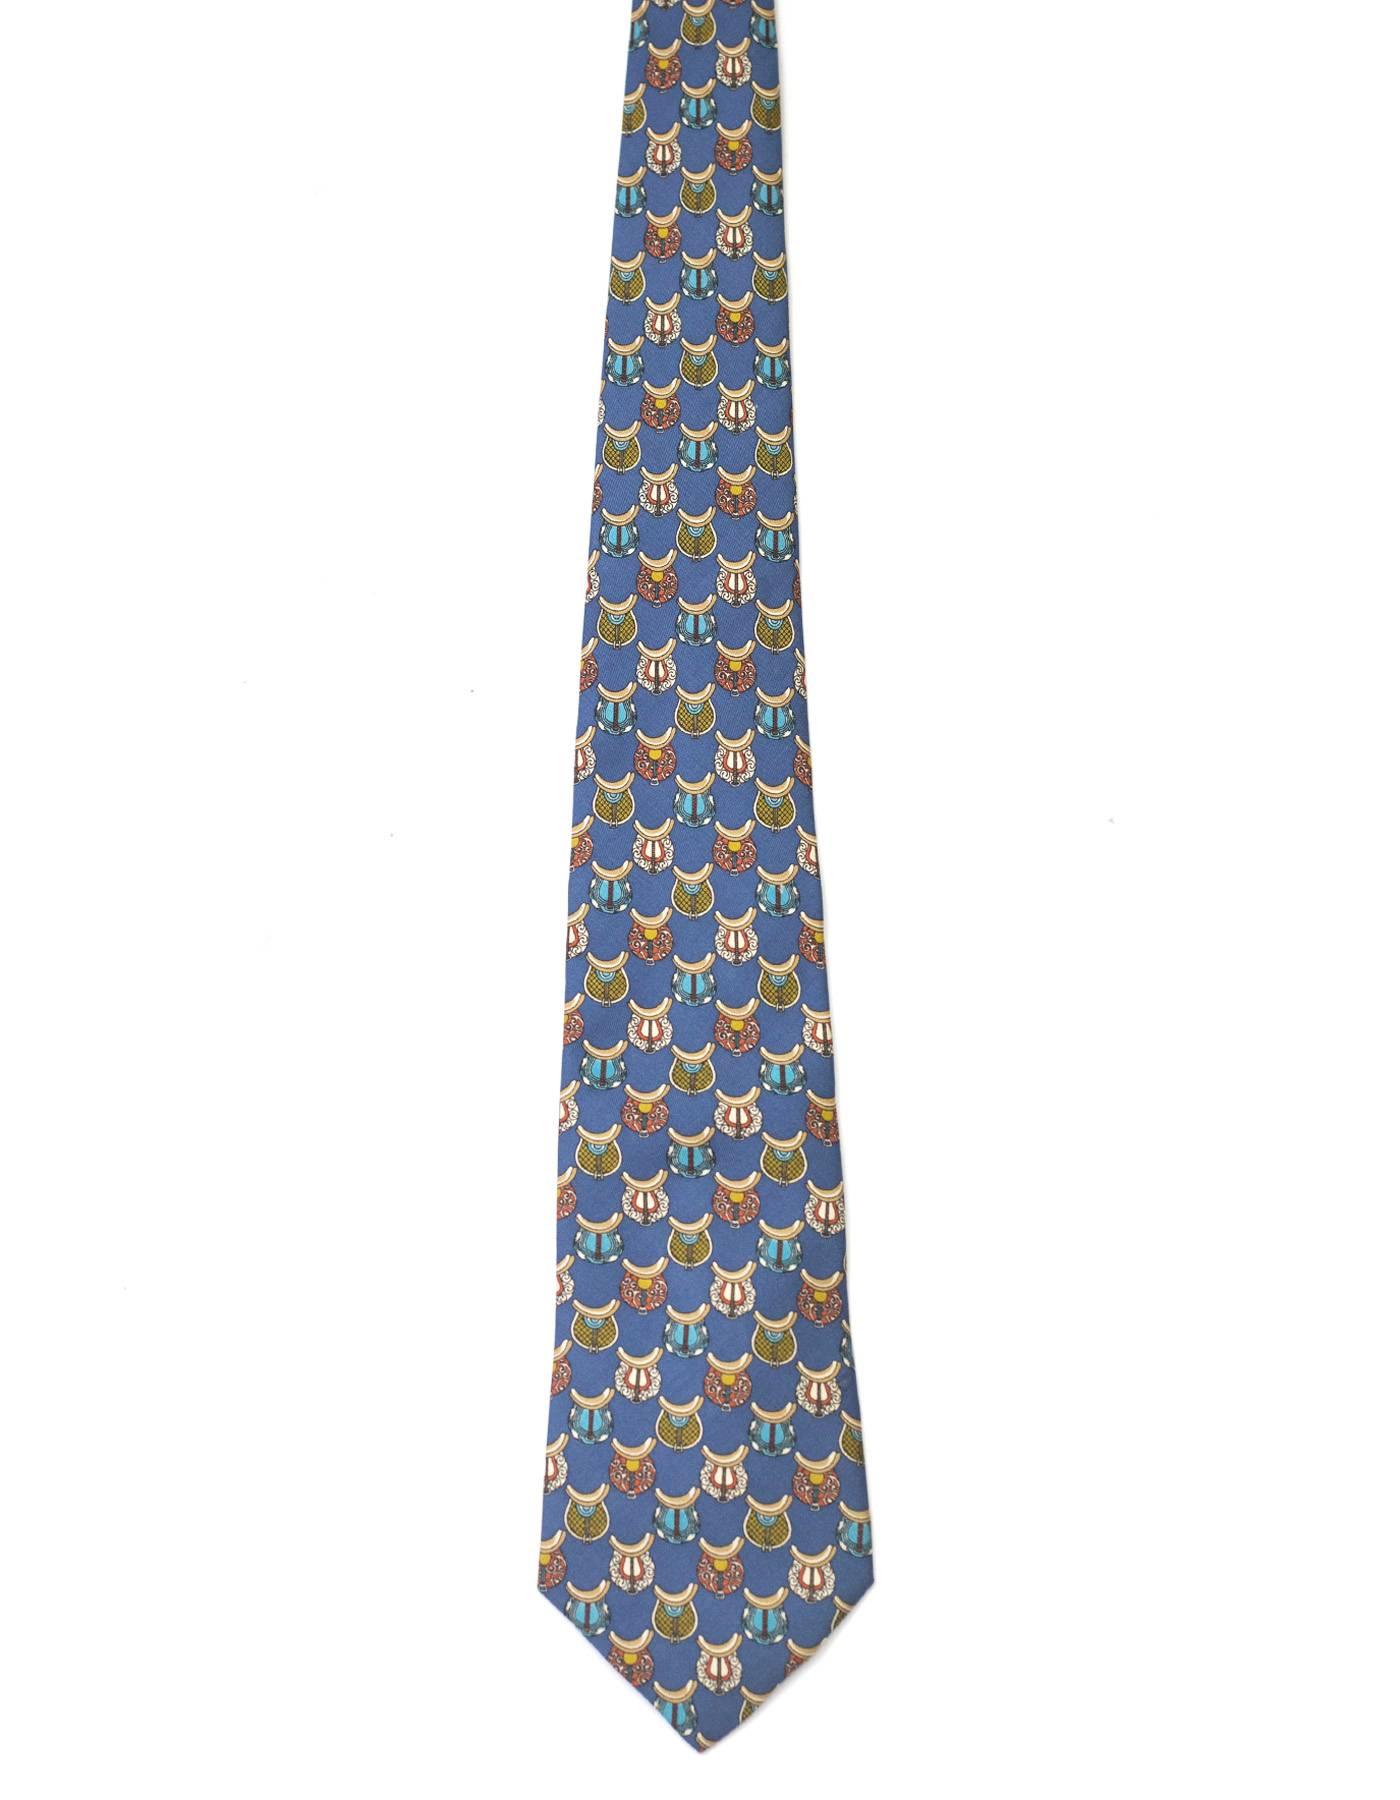 Salvatore Ferragamo Blue Saddle Print Silk Tie
Features different colored and patterend saddles printed throughout

Made In: Italy
Color: Blue and multi-colored
Composition: 100% silk
Overall Condition: Excellent pre-owned condition 
Measurements: